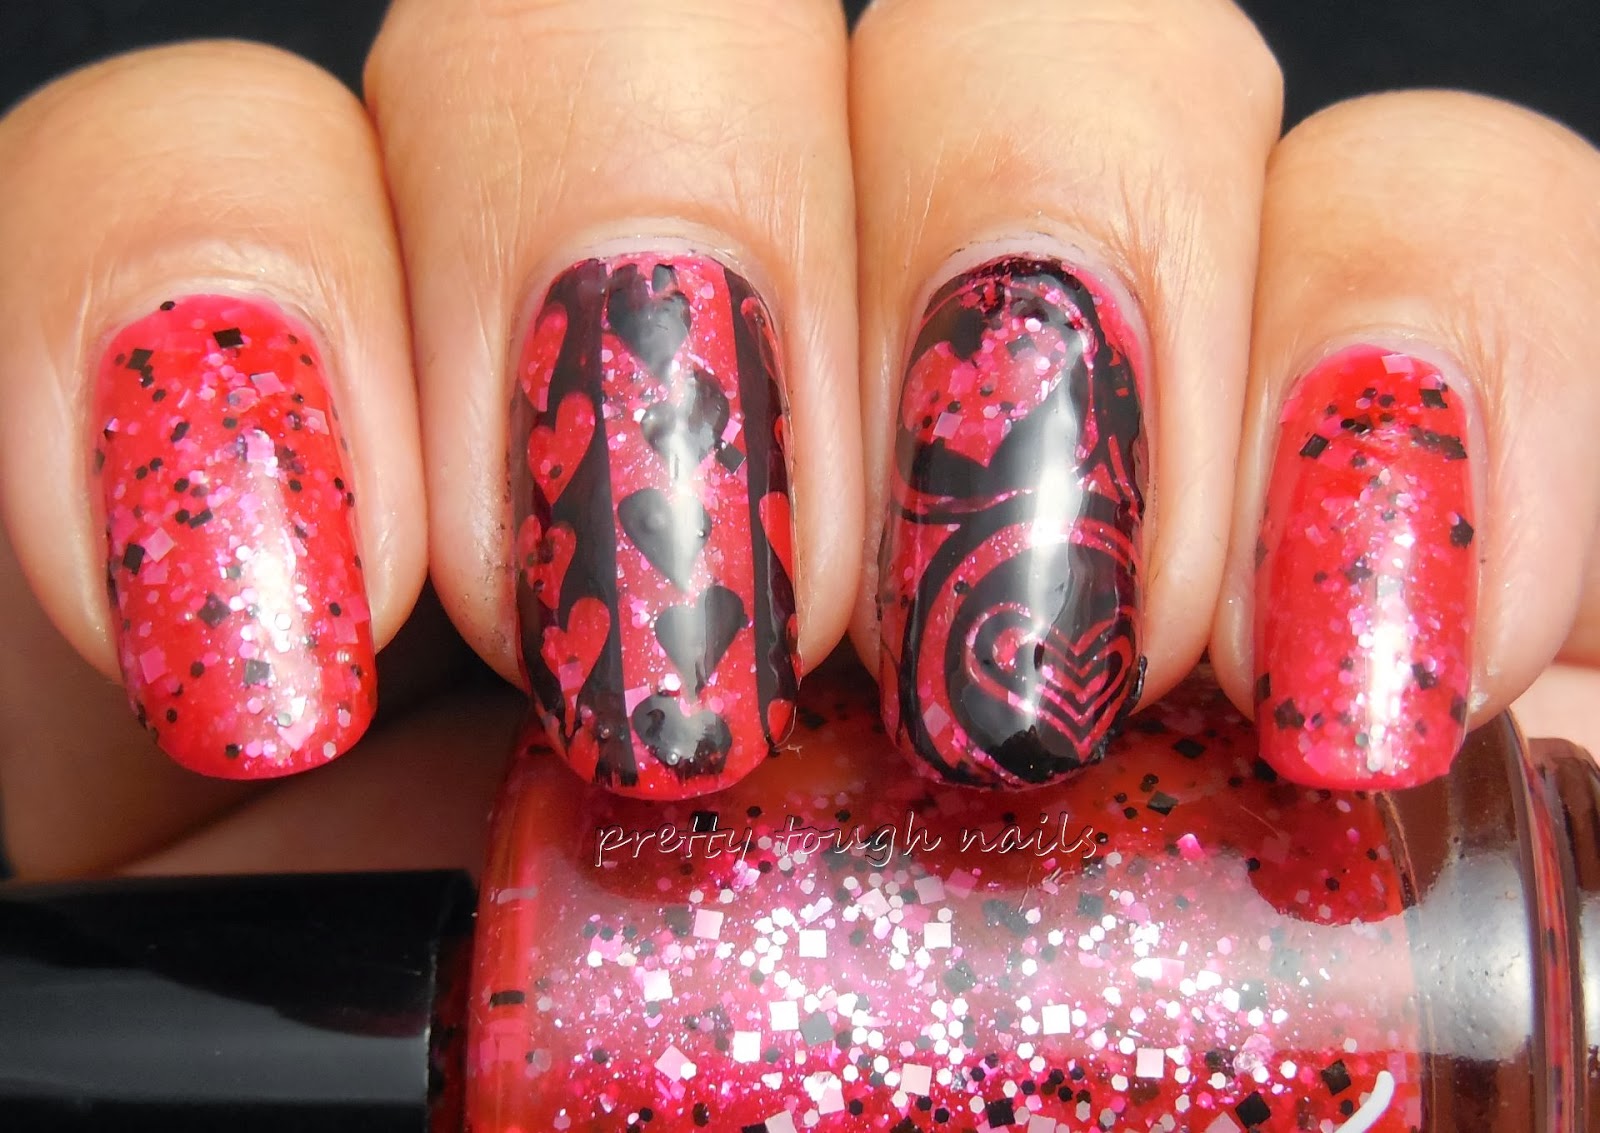 Hare Polish The Red Room With Pueen Stamping